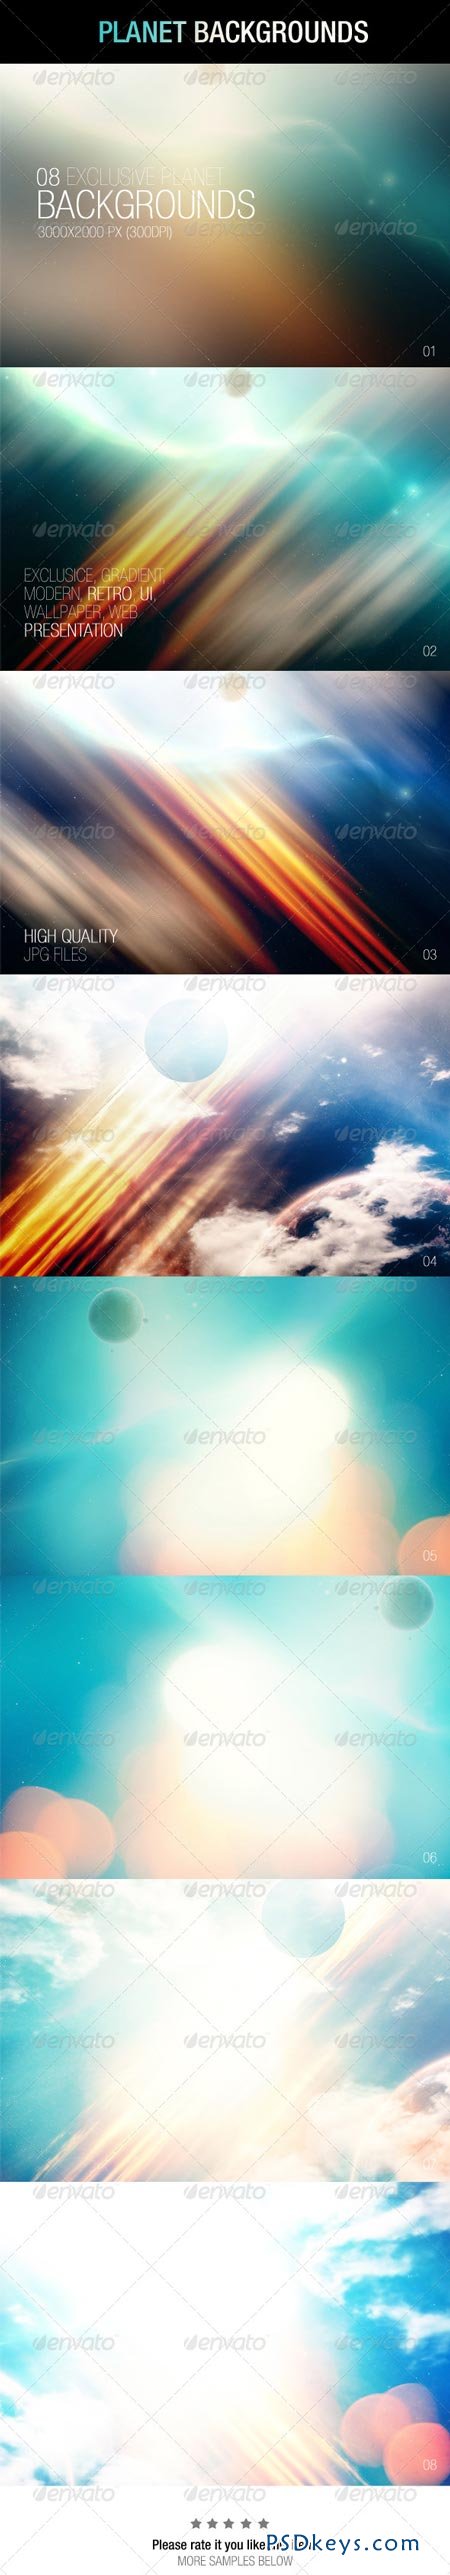 Planet Backgrounds 6884936